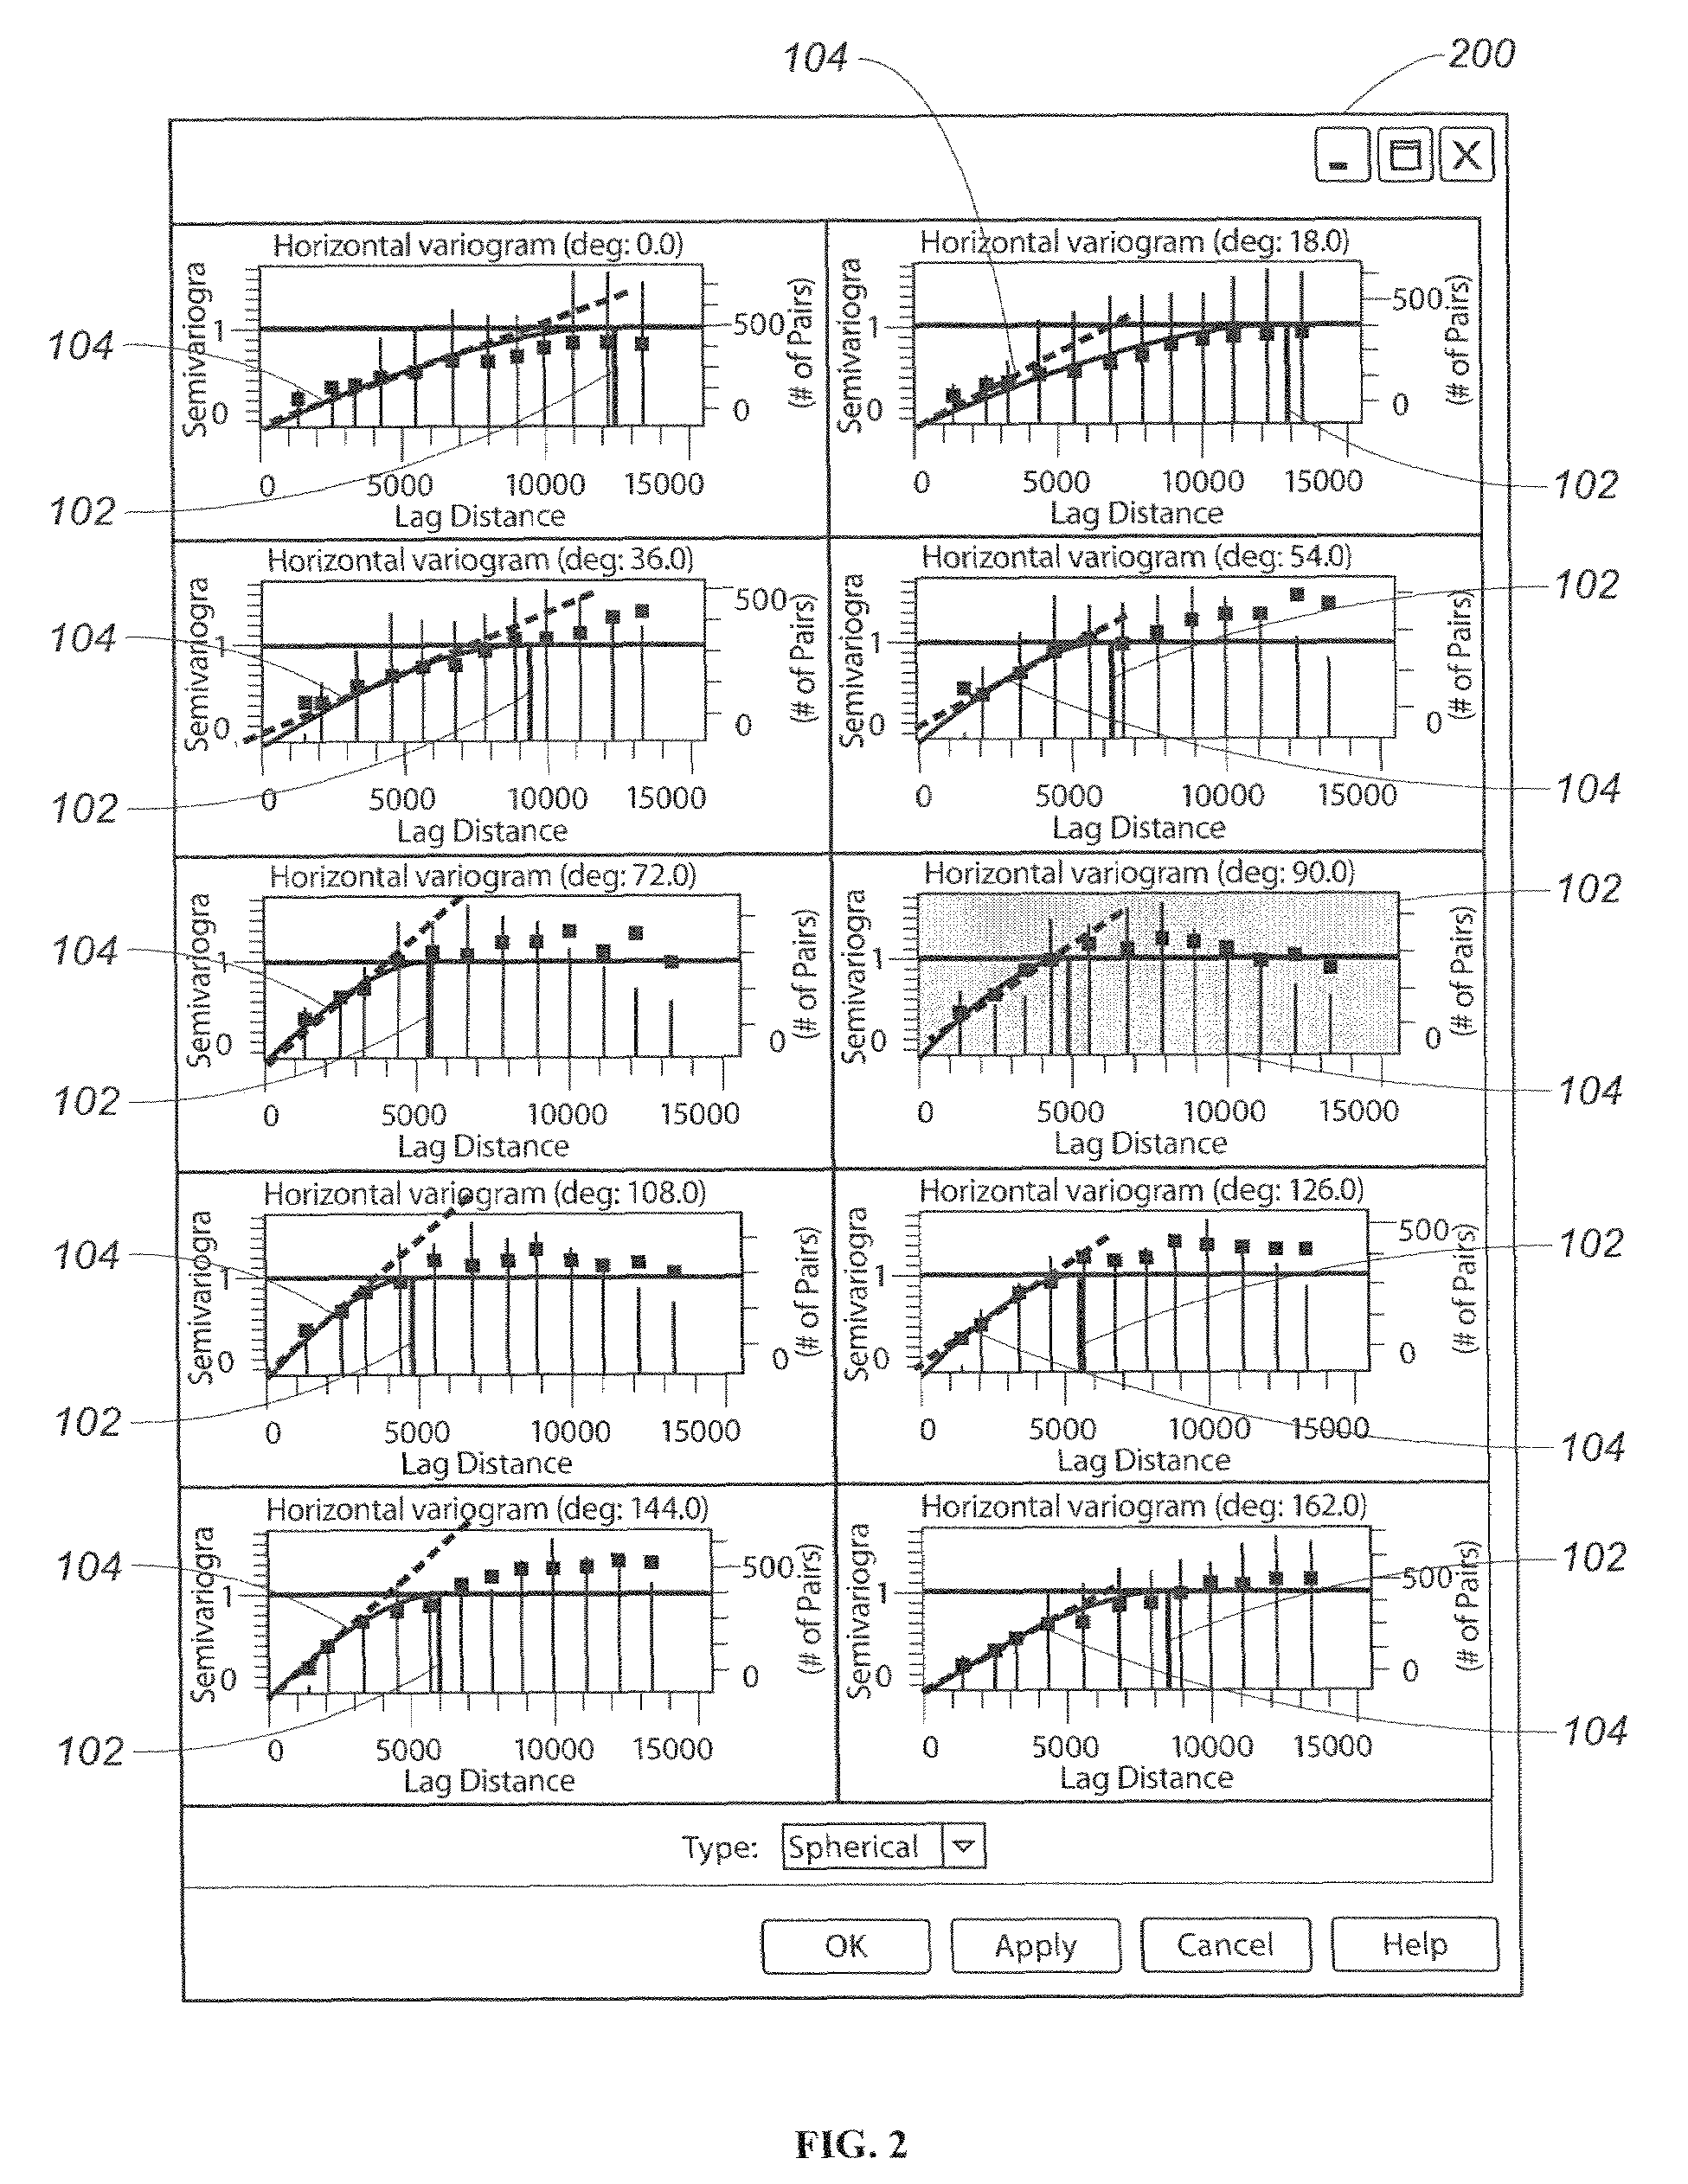 Systems and methods for computing a variogram model